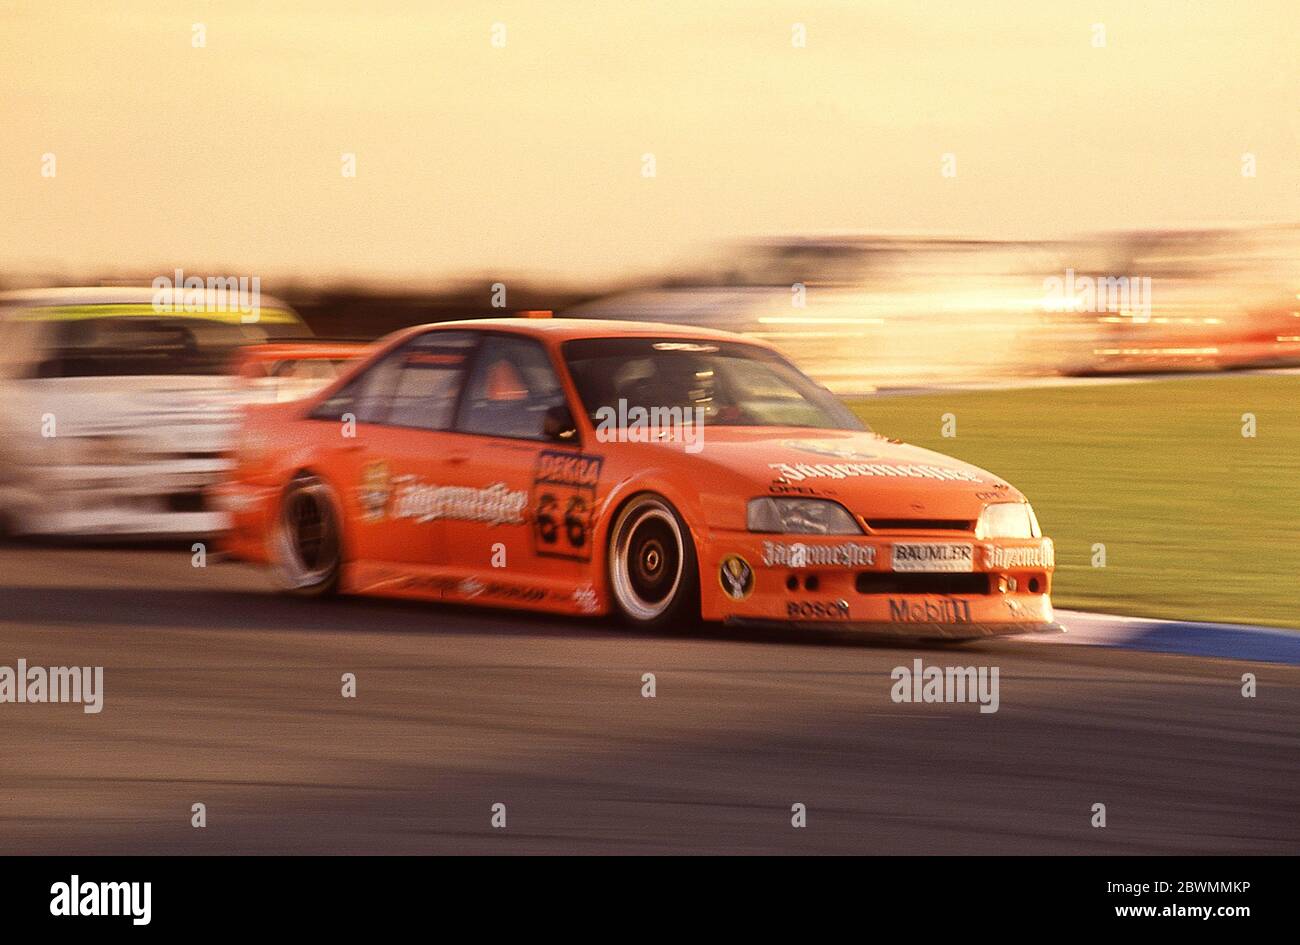 Opel Omega at the 1991 DTM races at Donnington Park UK Stock Photo